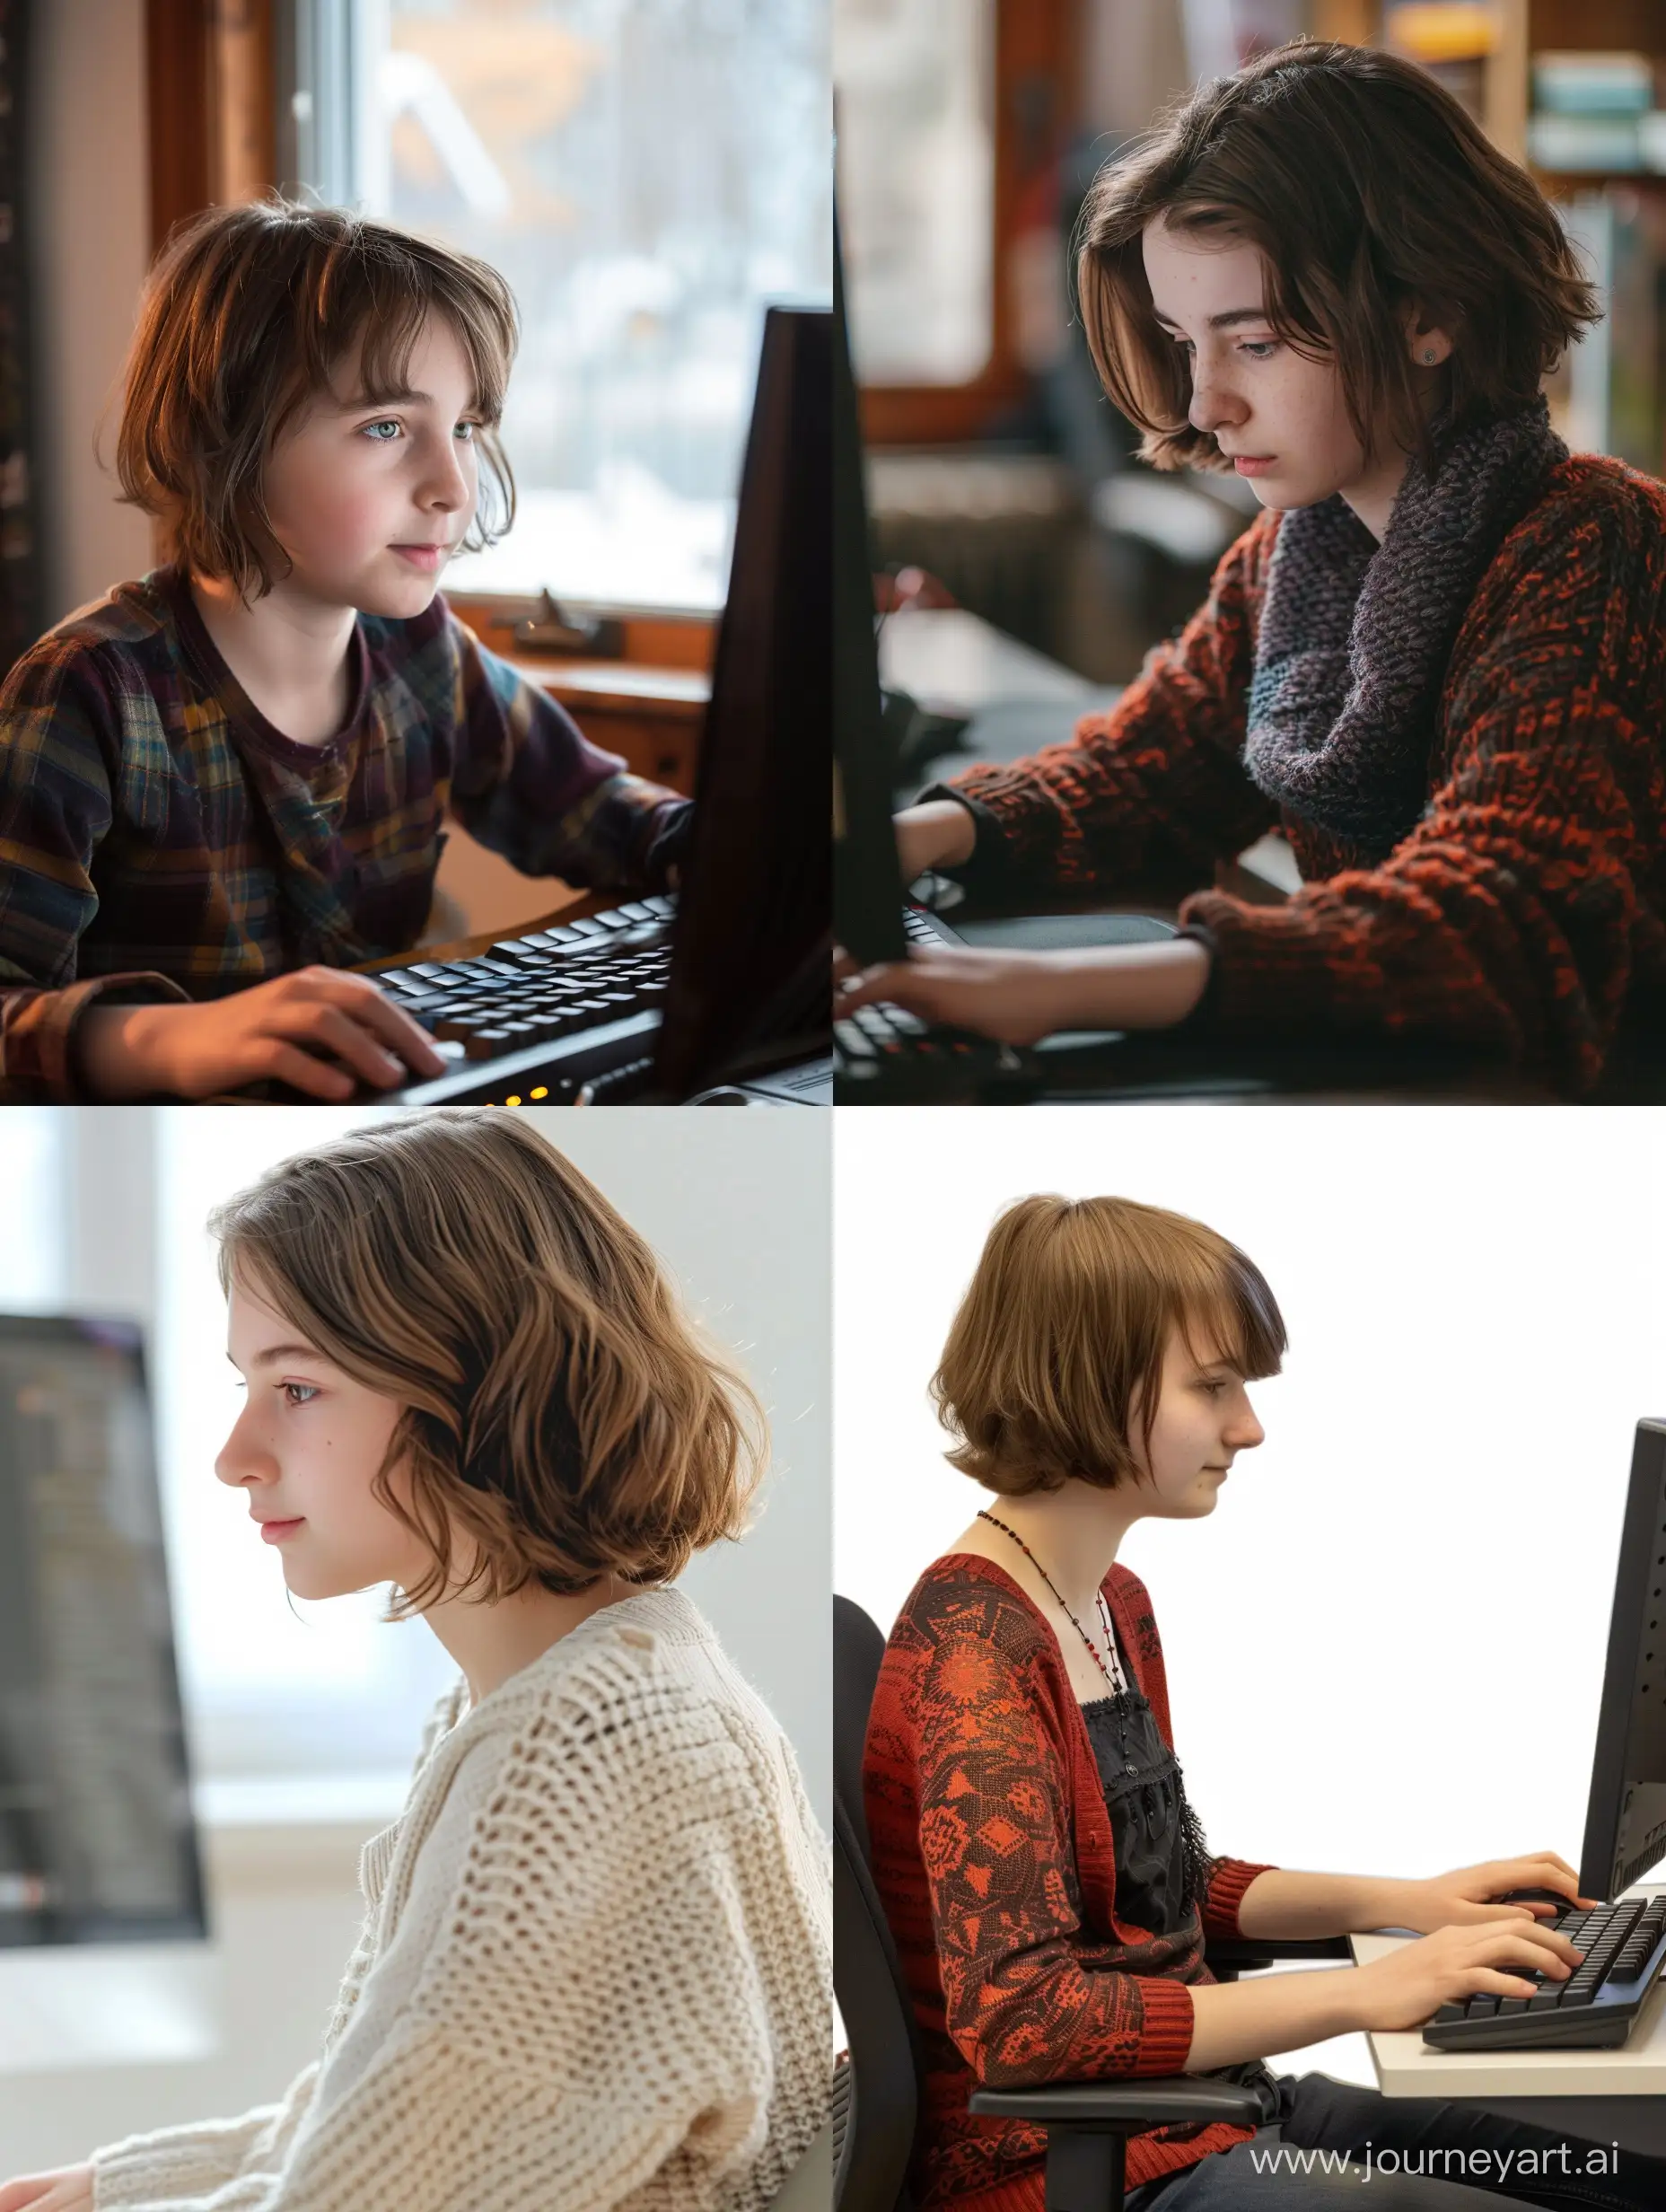 A white girl with short brown hair is sitting playing computer